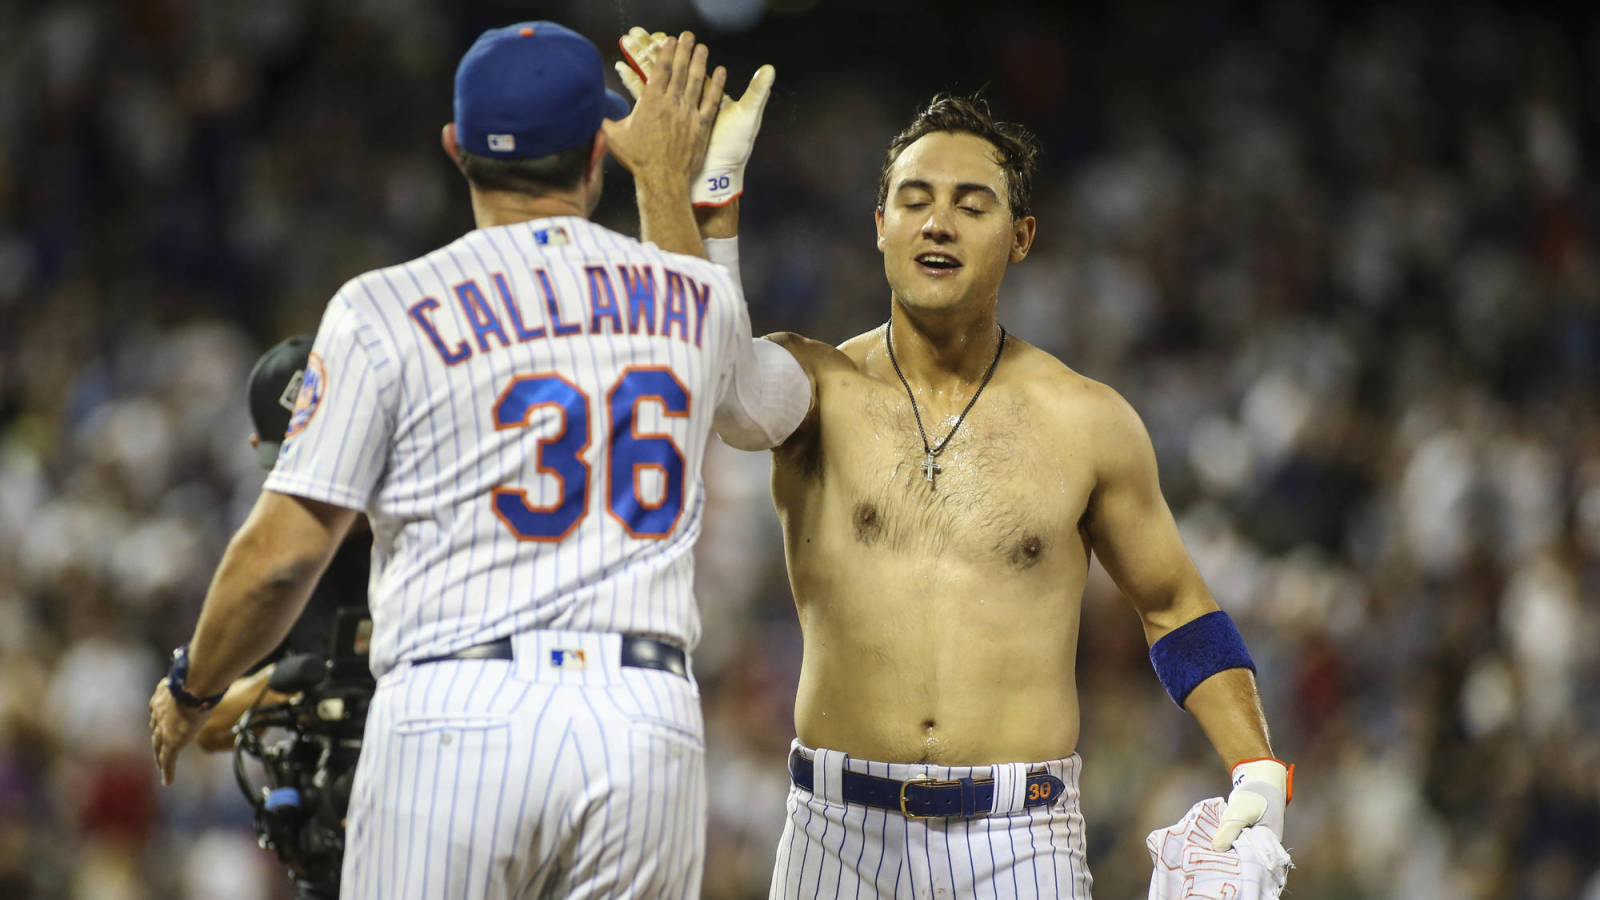 Mets now tied for wild card after stunning Nats